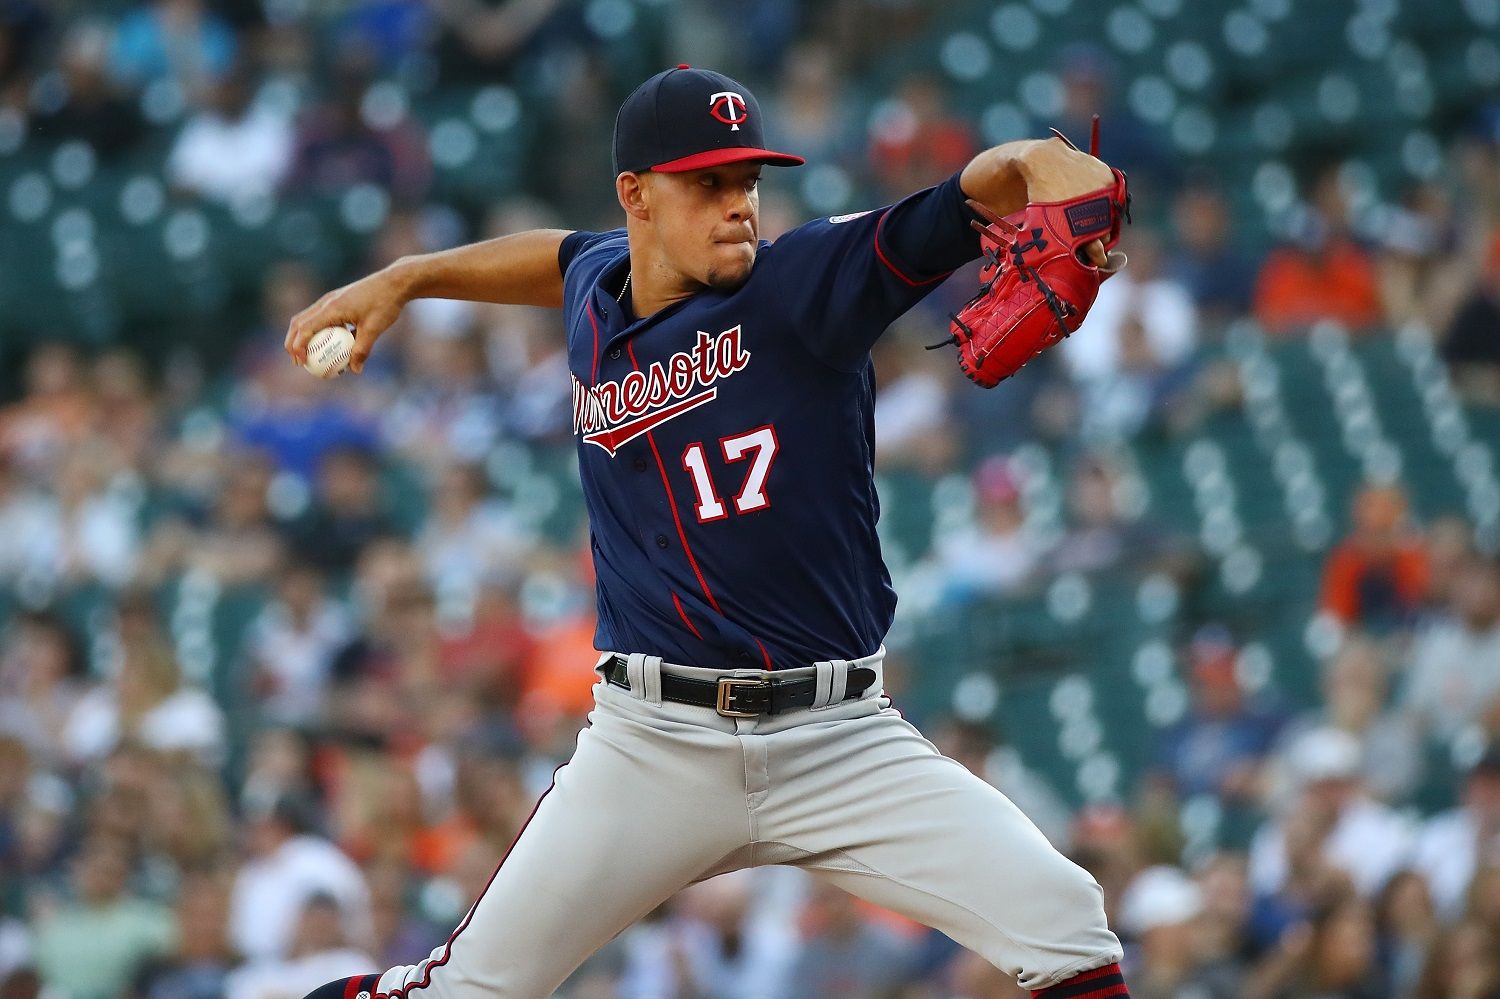 DETROIT, MI - JUNE 13: Jose Berrios #17 of the Minnesota Twins throws a first inning pitch while playing the Detroit Tigers at Comerica Park on June 13, 2018 in Detroit, Michigan.  (Photo by Gregory Shamus/Getty Images)